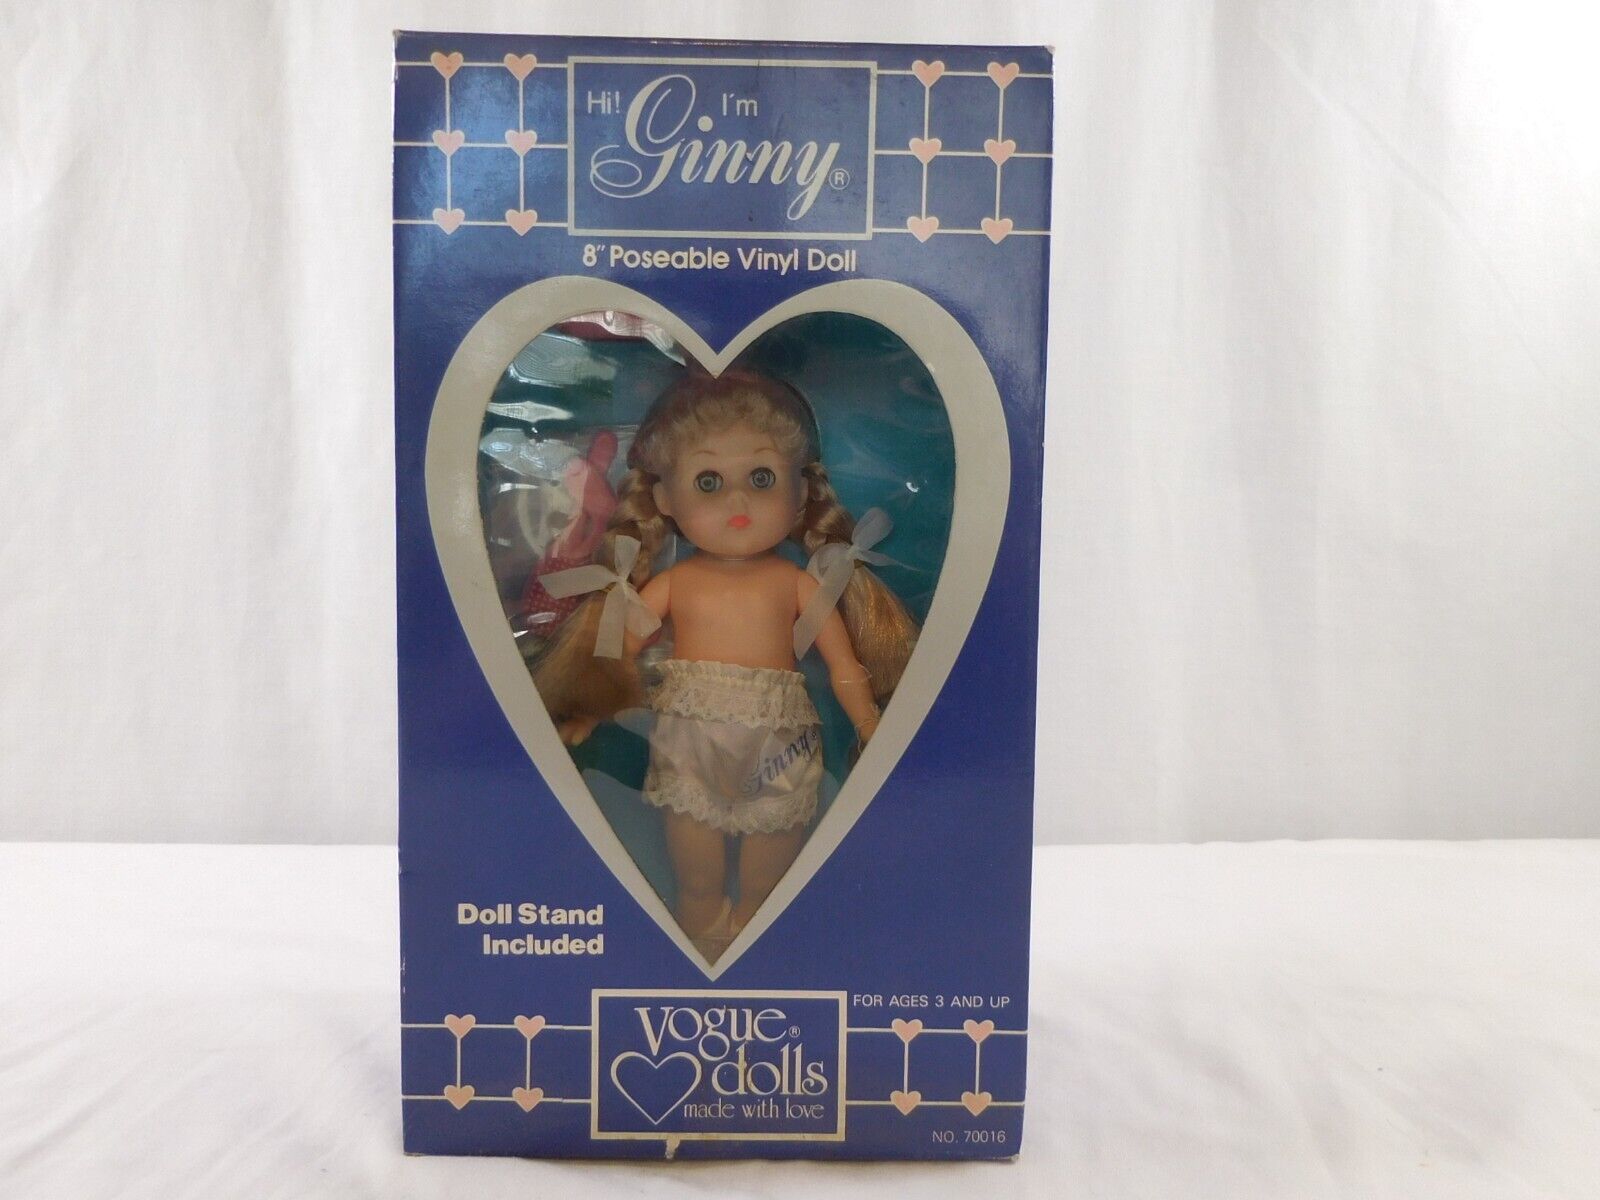 Vintage Ginny Vogue Doll 8” NEW in Box Posable Stand 1984 #70016 Hi I'm Ginny - $12.90